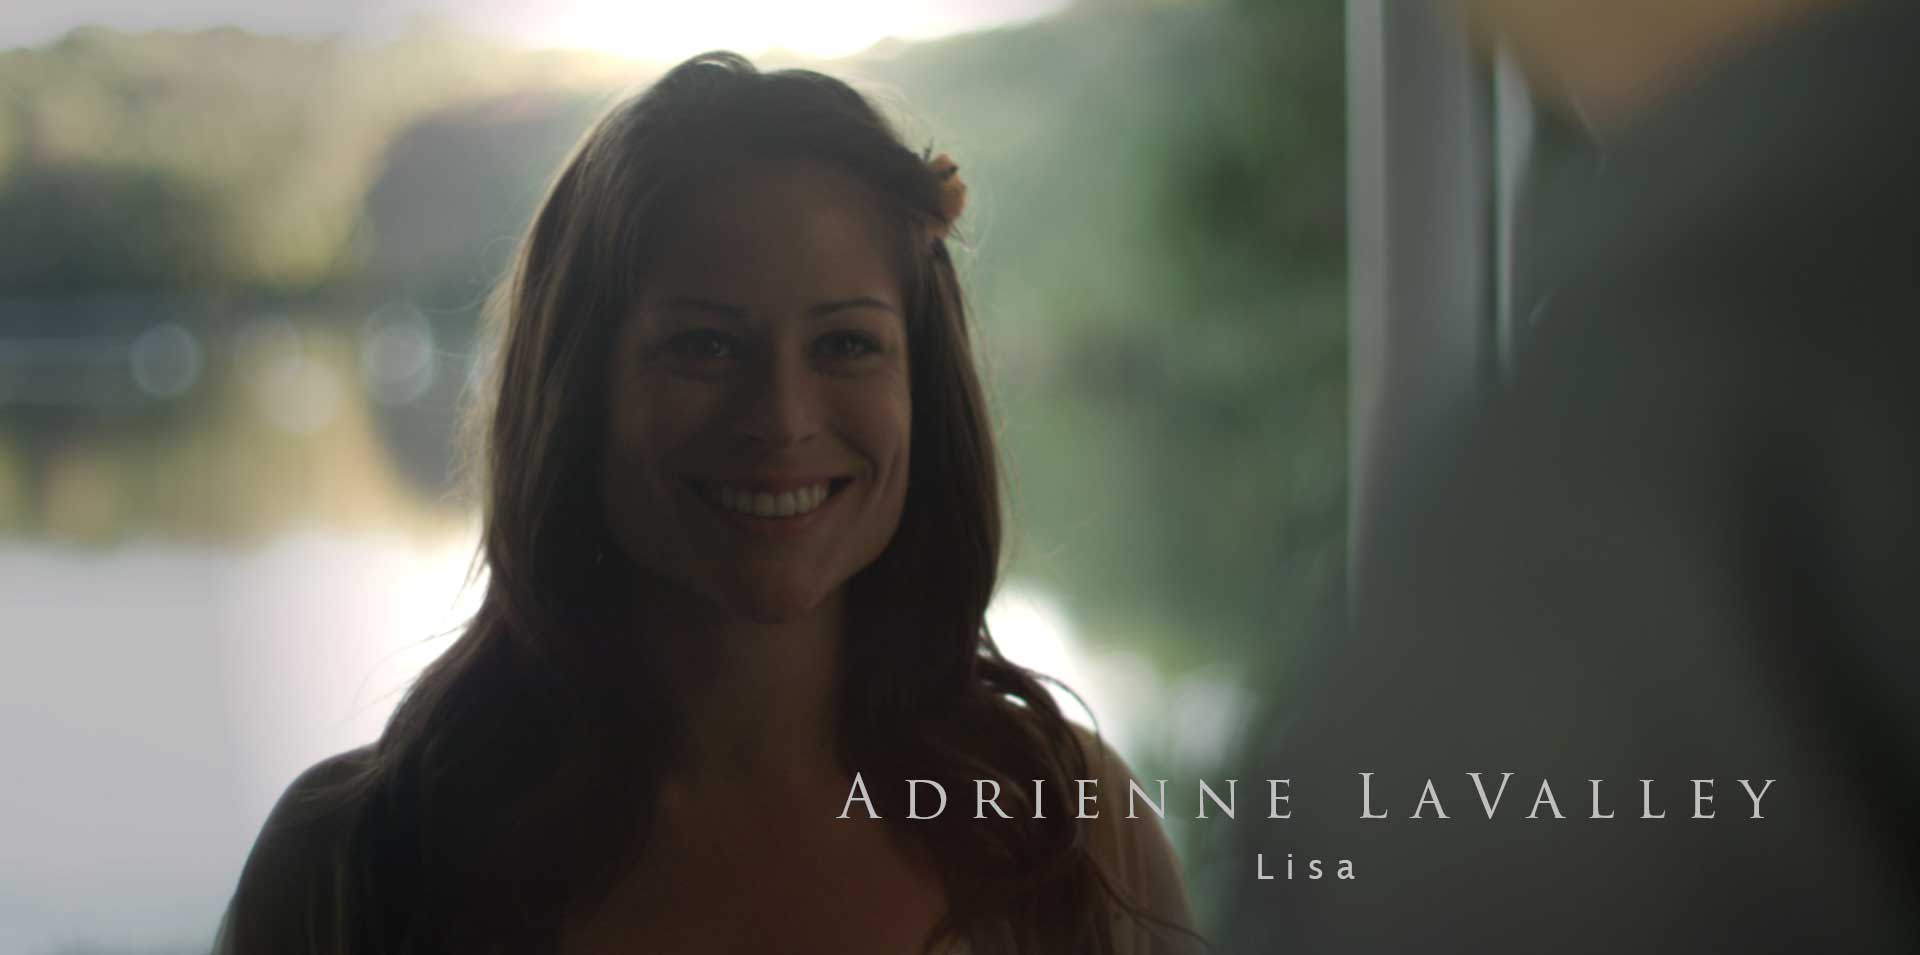 Actress adrienne lavalley